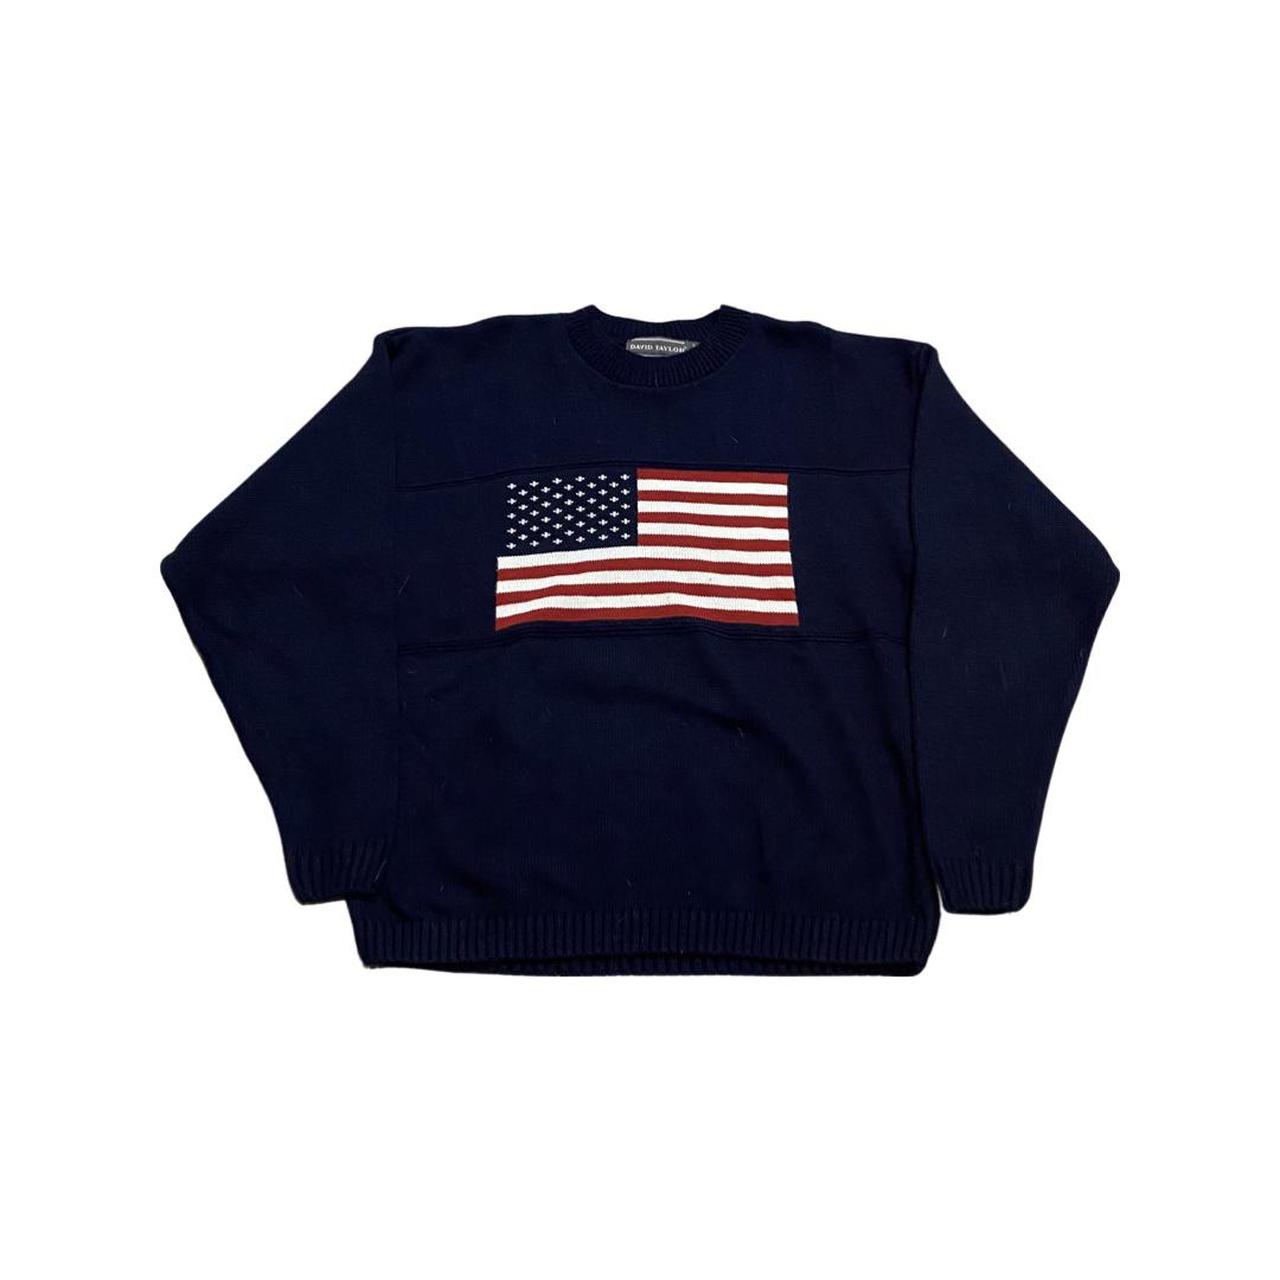 VINTAGE 90S MADE IN USA AMERICAN FLAG ACRYLIC KNIT... - Depop